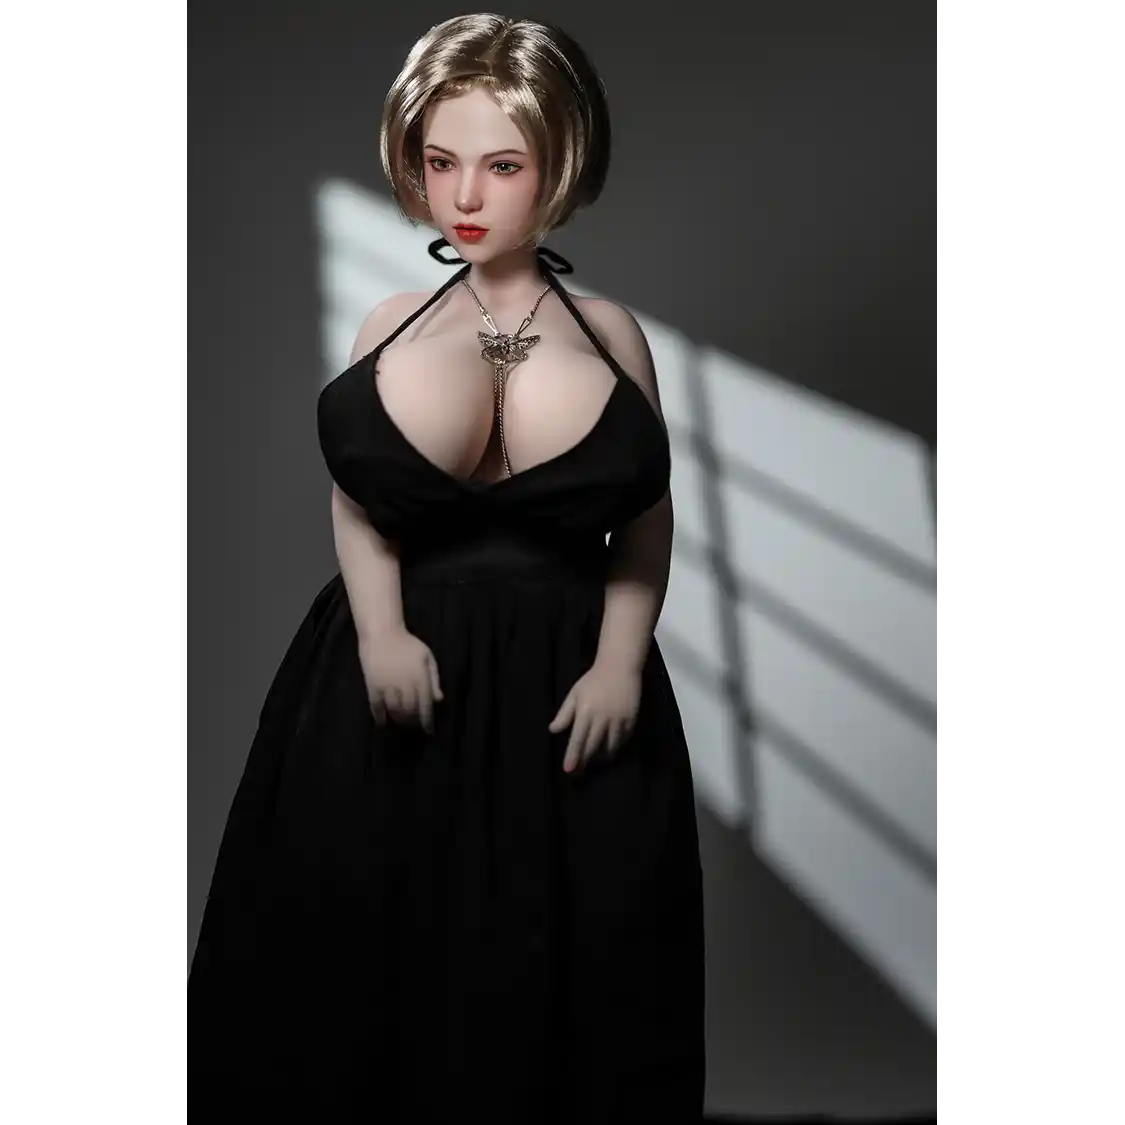 1ft 11in 60cm white female mini silicone sex doll with blonde hair, light skin and extra large breasts.